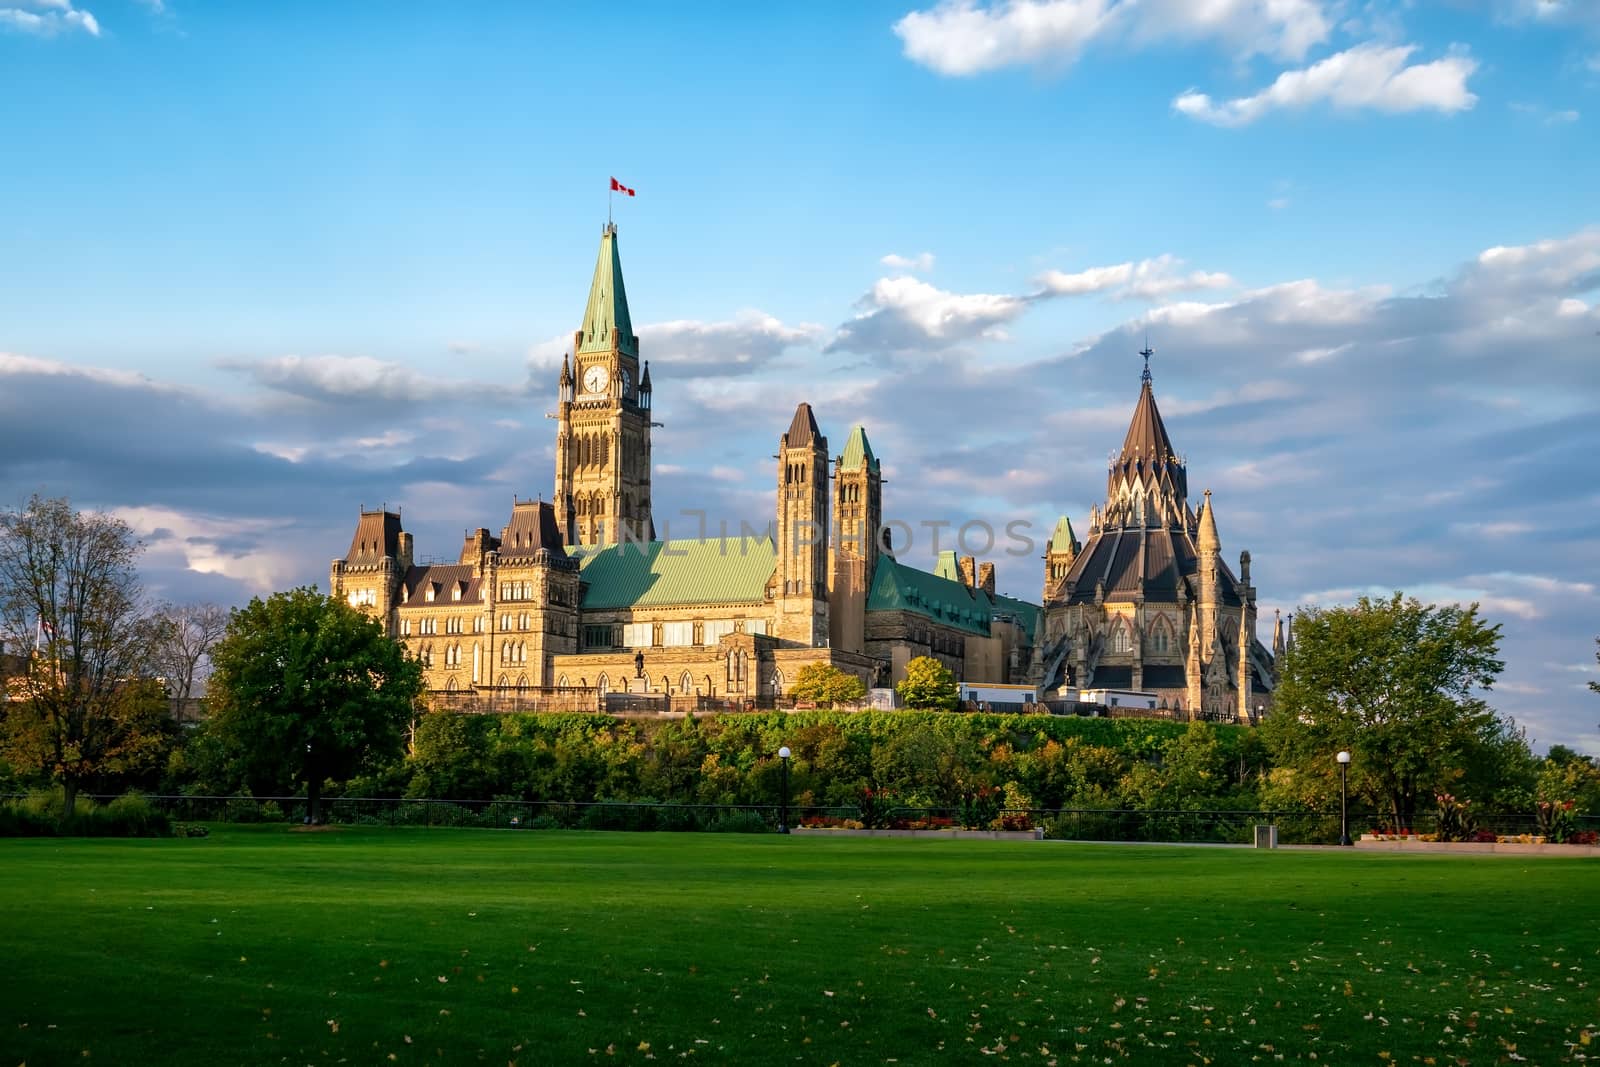 Parliament Hill in Ottawa, Ontario, Canada  by f11photo